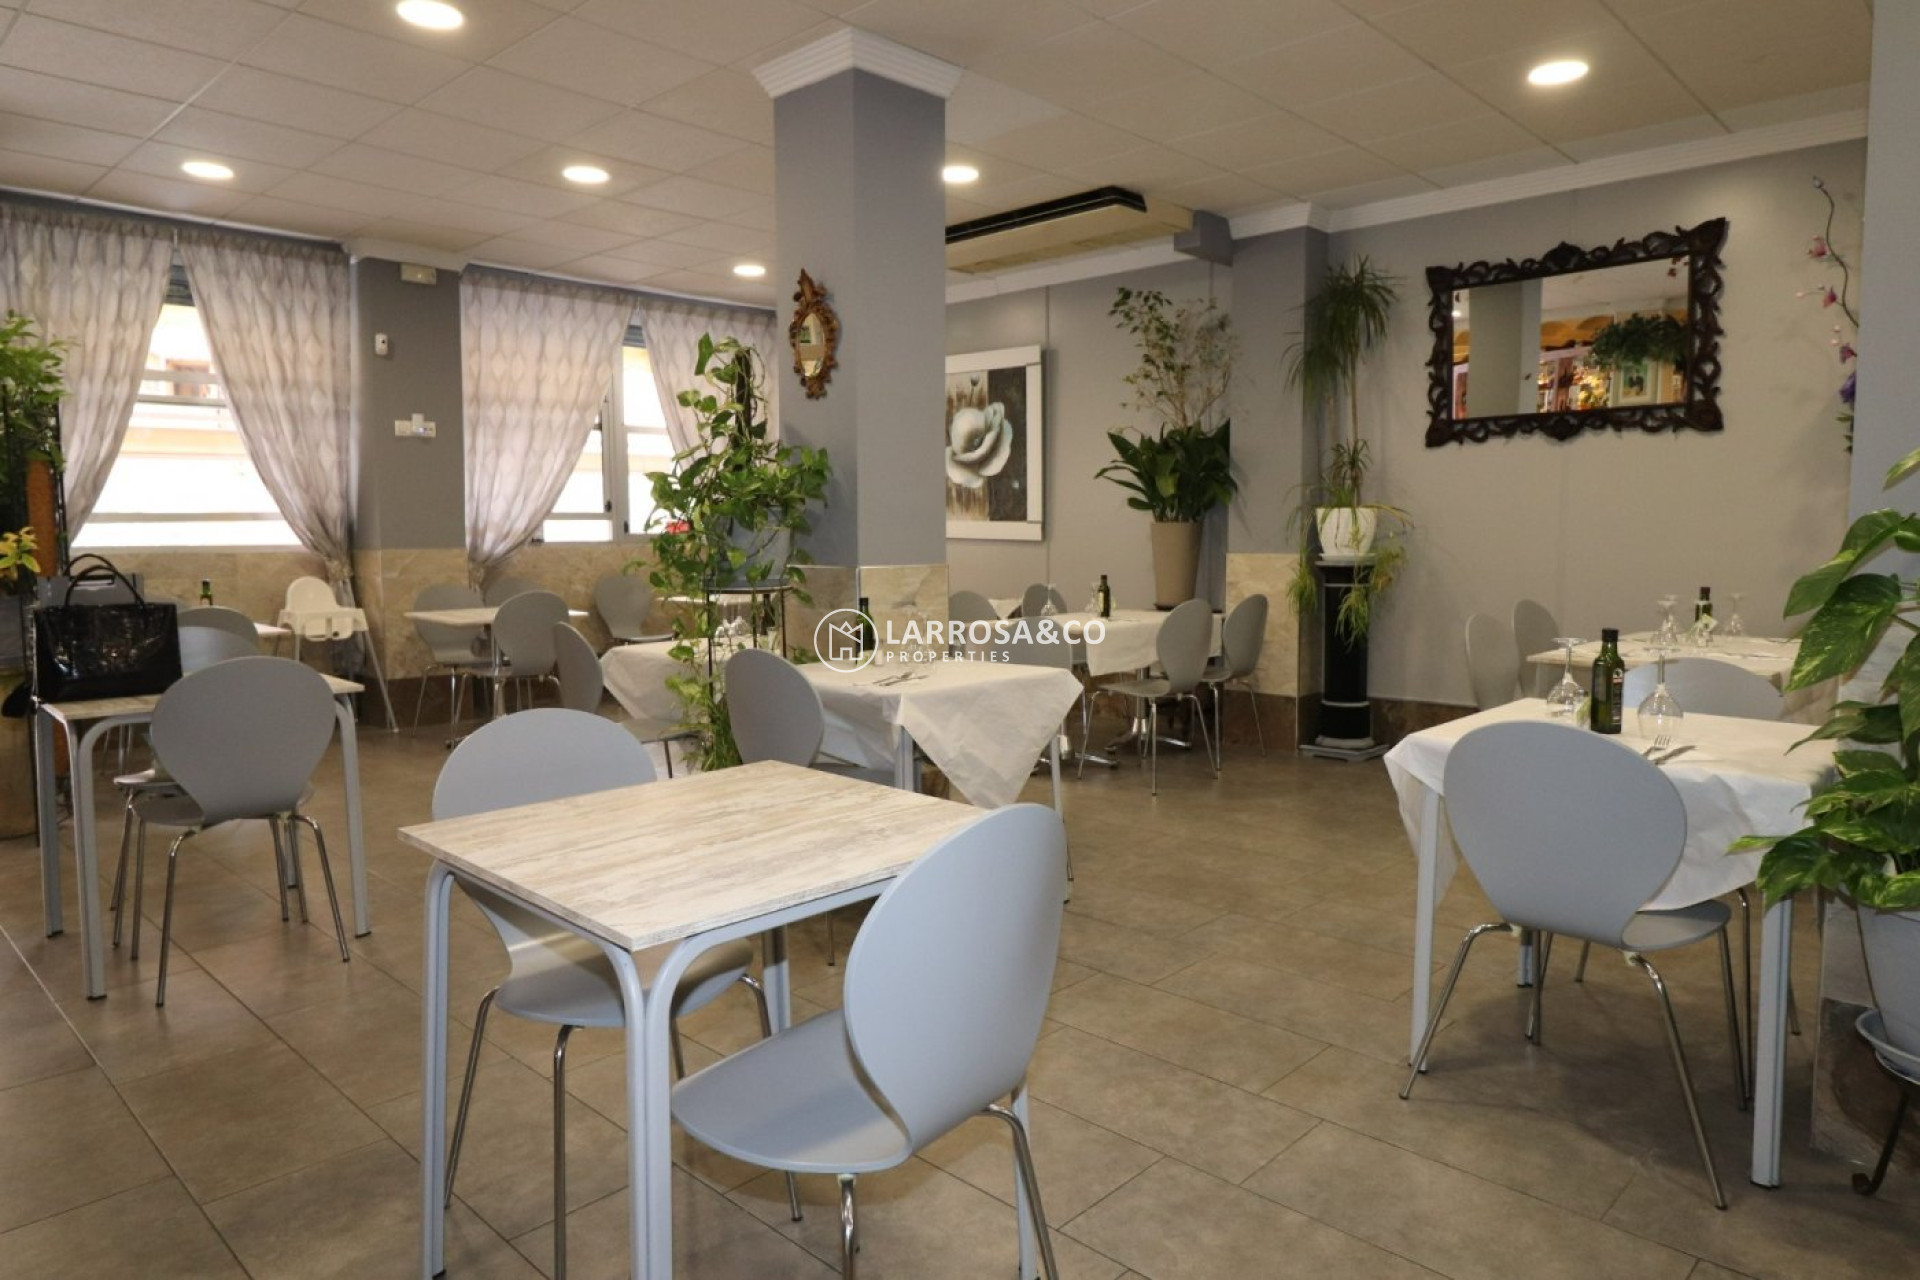 A Vendre - Commercial space - Torrevieja - Playa del cura